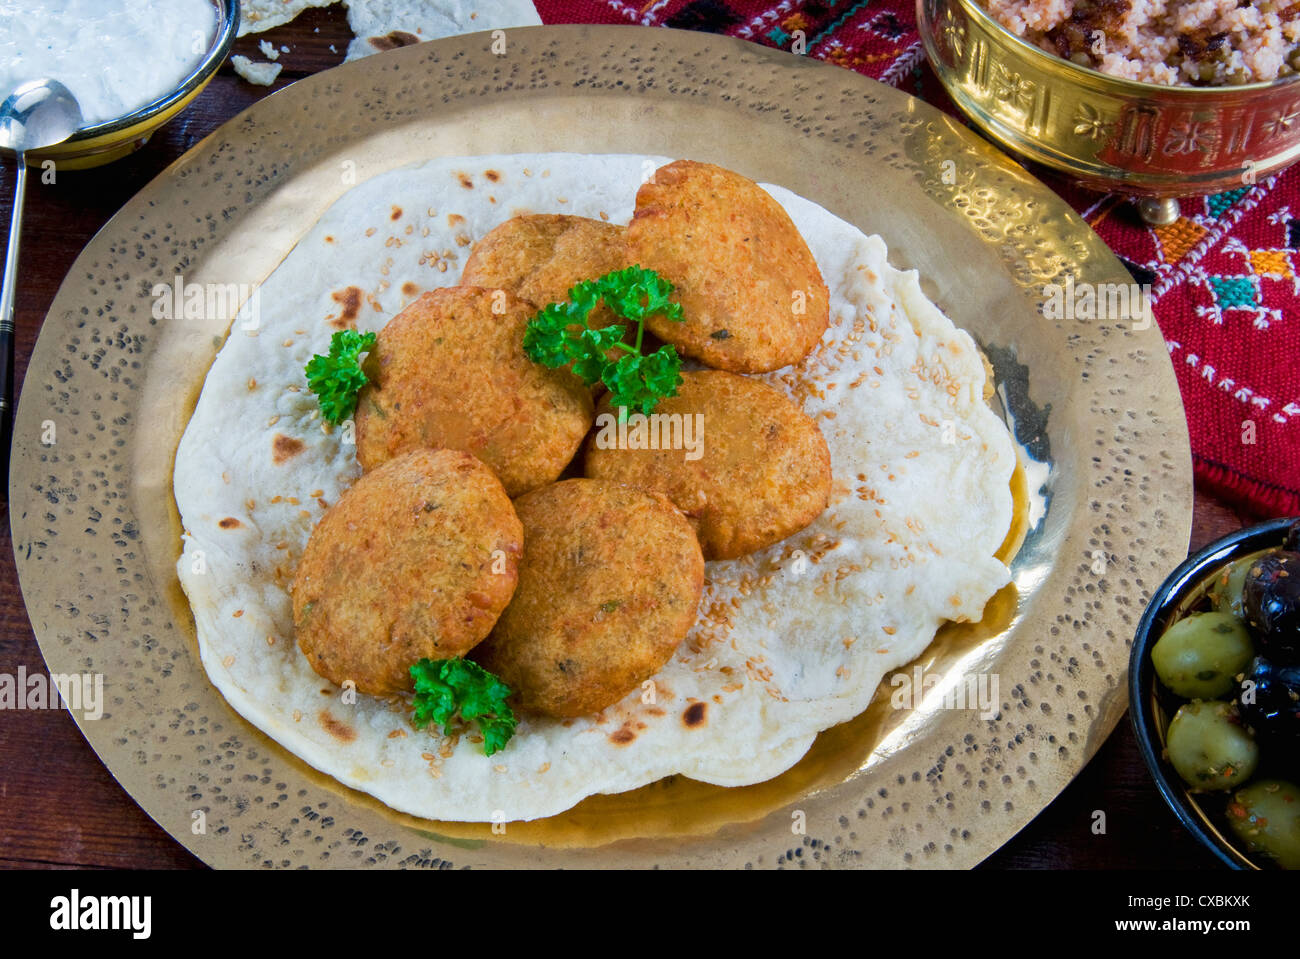 Falafel, a deep-fried balls or patties made from ground chickpeas and or fava beans, Arabic Countries Stock Photo